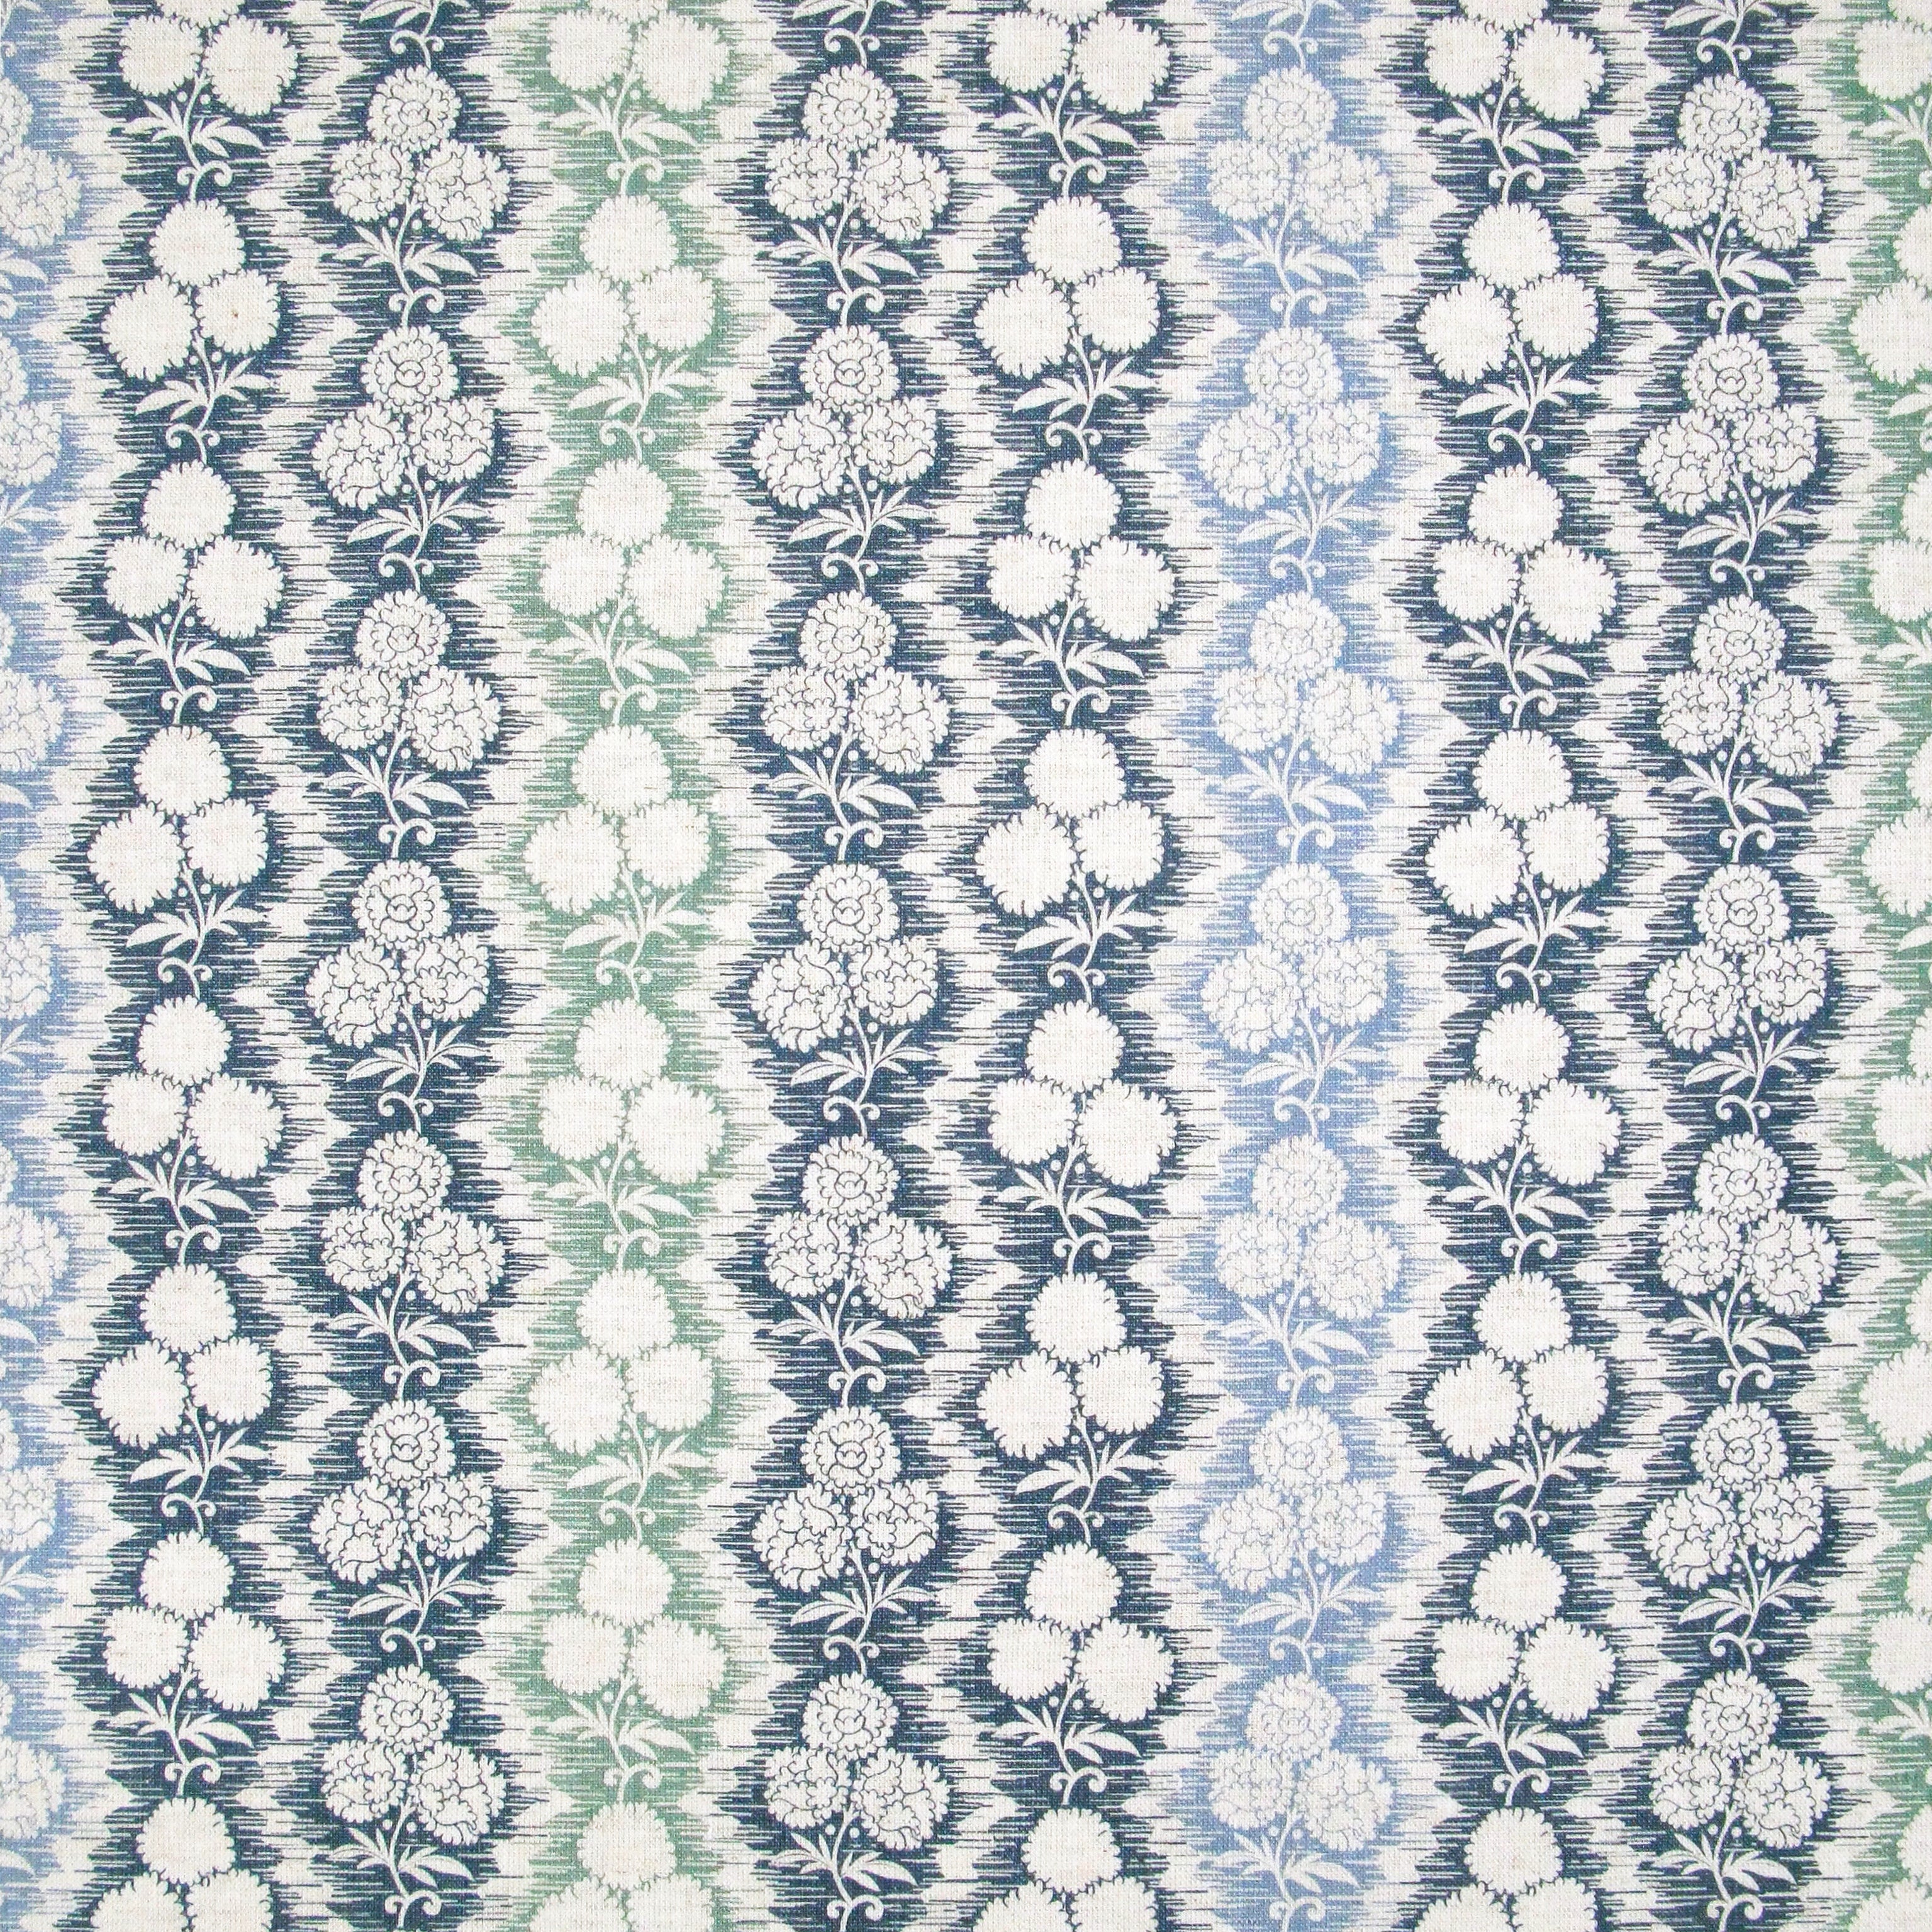 Fabric in a detailed botanical stripe print in shades of blue and green on a white field.